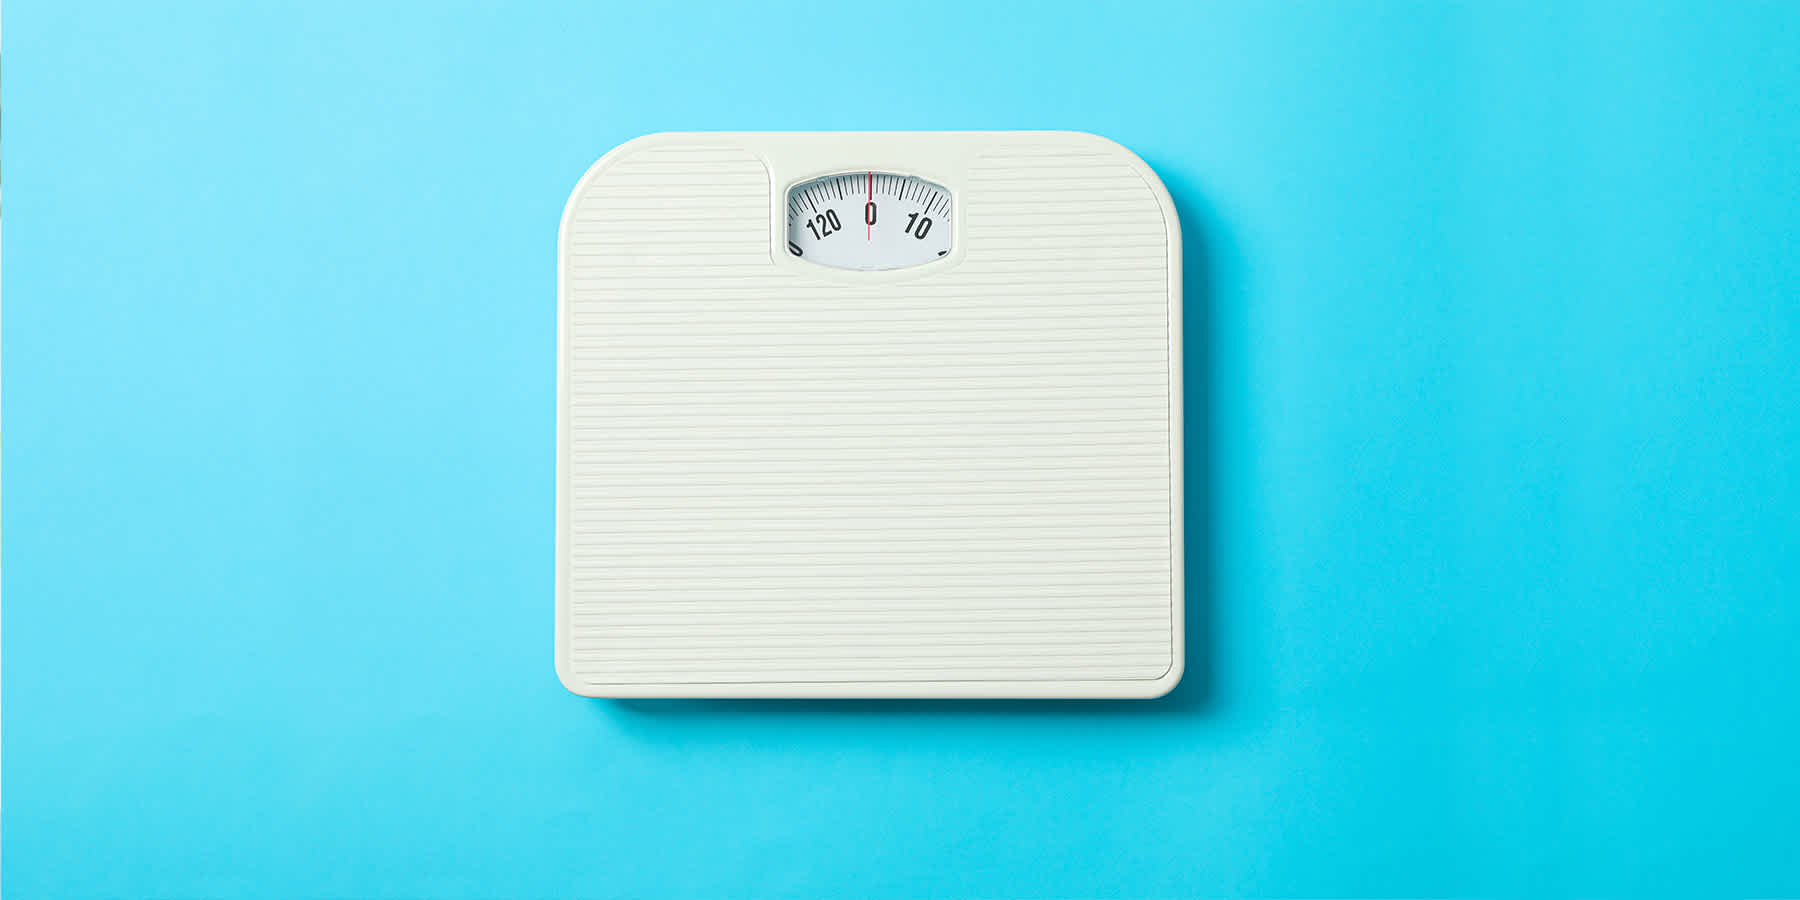 Bathroom scale against a blue background to represent diabetes and weight gain